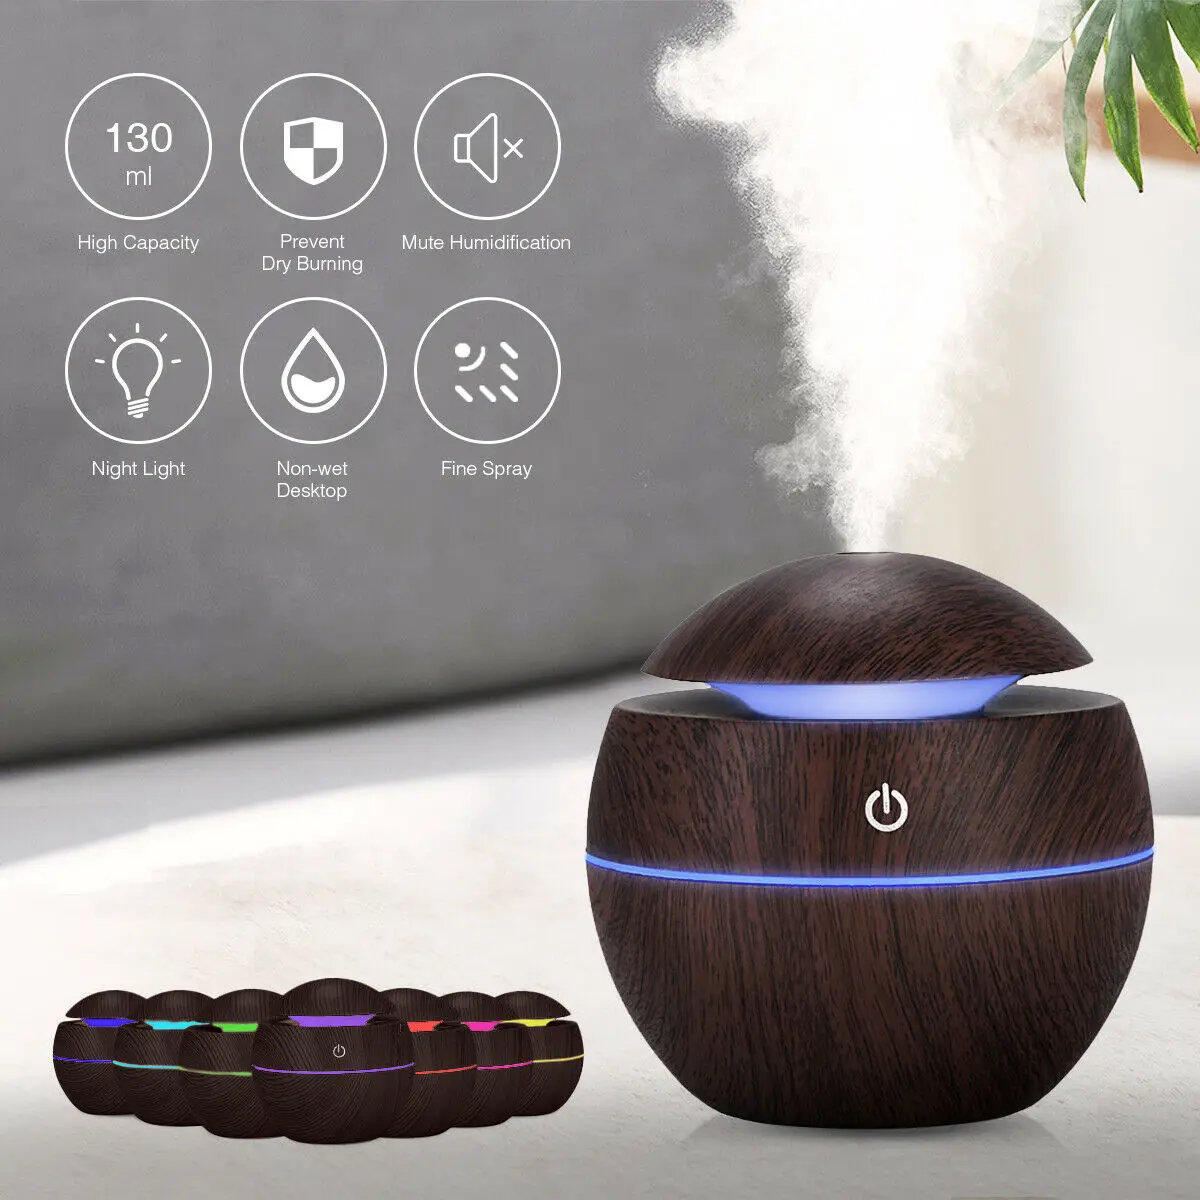 LED USB Humidifier Ultrasonic Essential Oil Diffuser Aroma Aromatherapy Purifier 